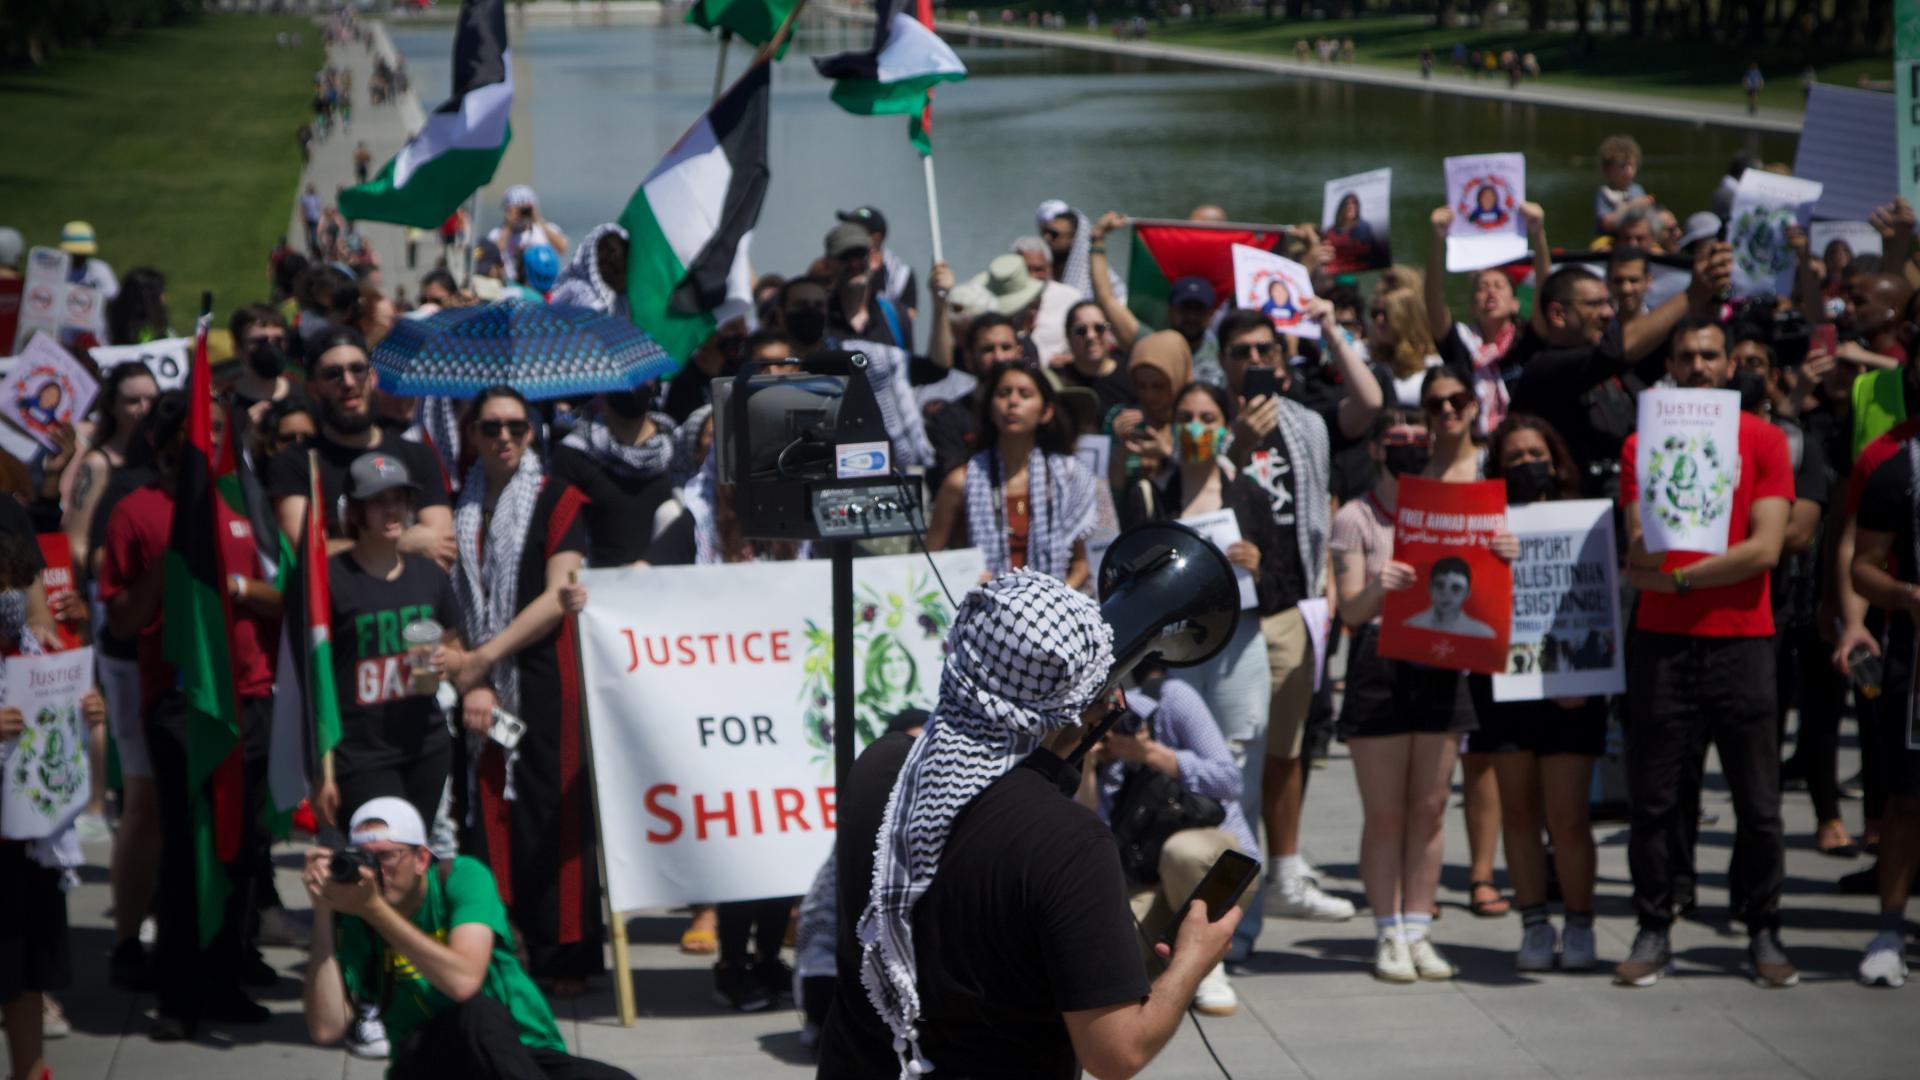 Taher Herzallah of American Muslims for Palestine speaks to a crowd of demonstrators at the Nakba rally in Washington on 15 May 2022.